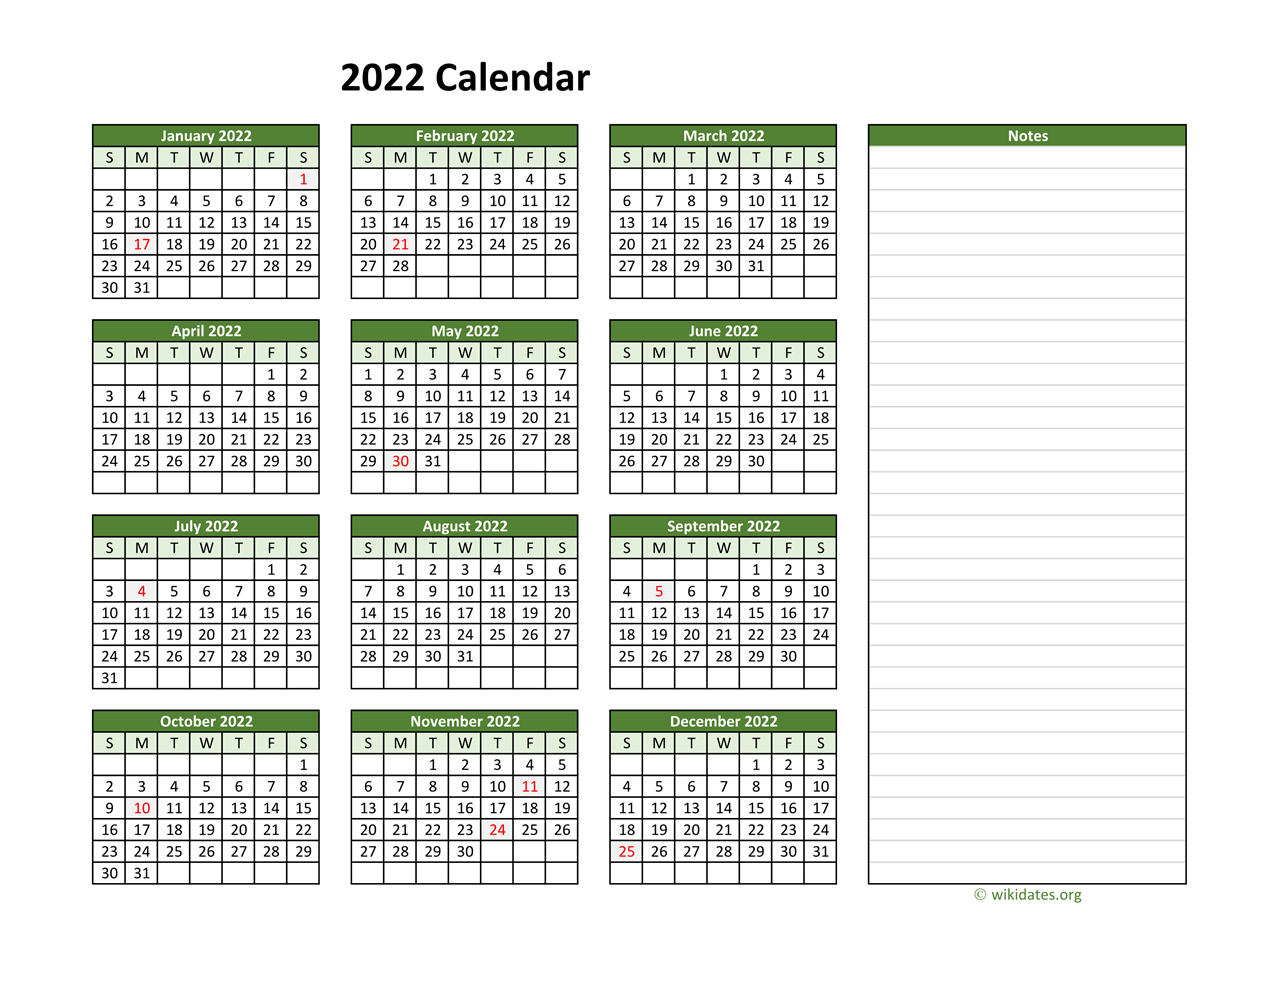 Printable Calendar 2022 With Notes Yearly Printable 2022 Calendar With Notes | Wikidates.org